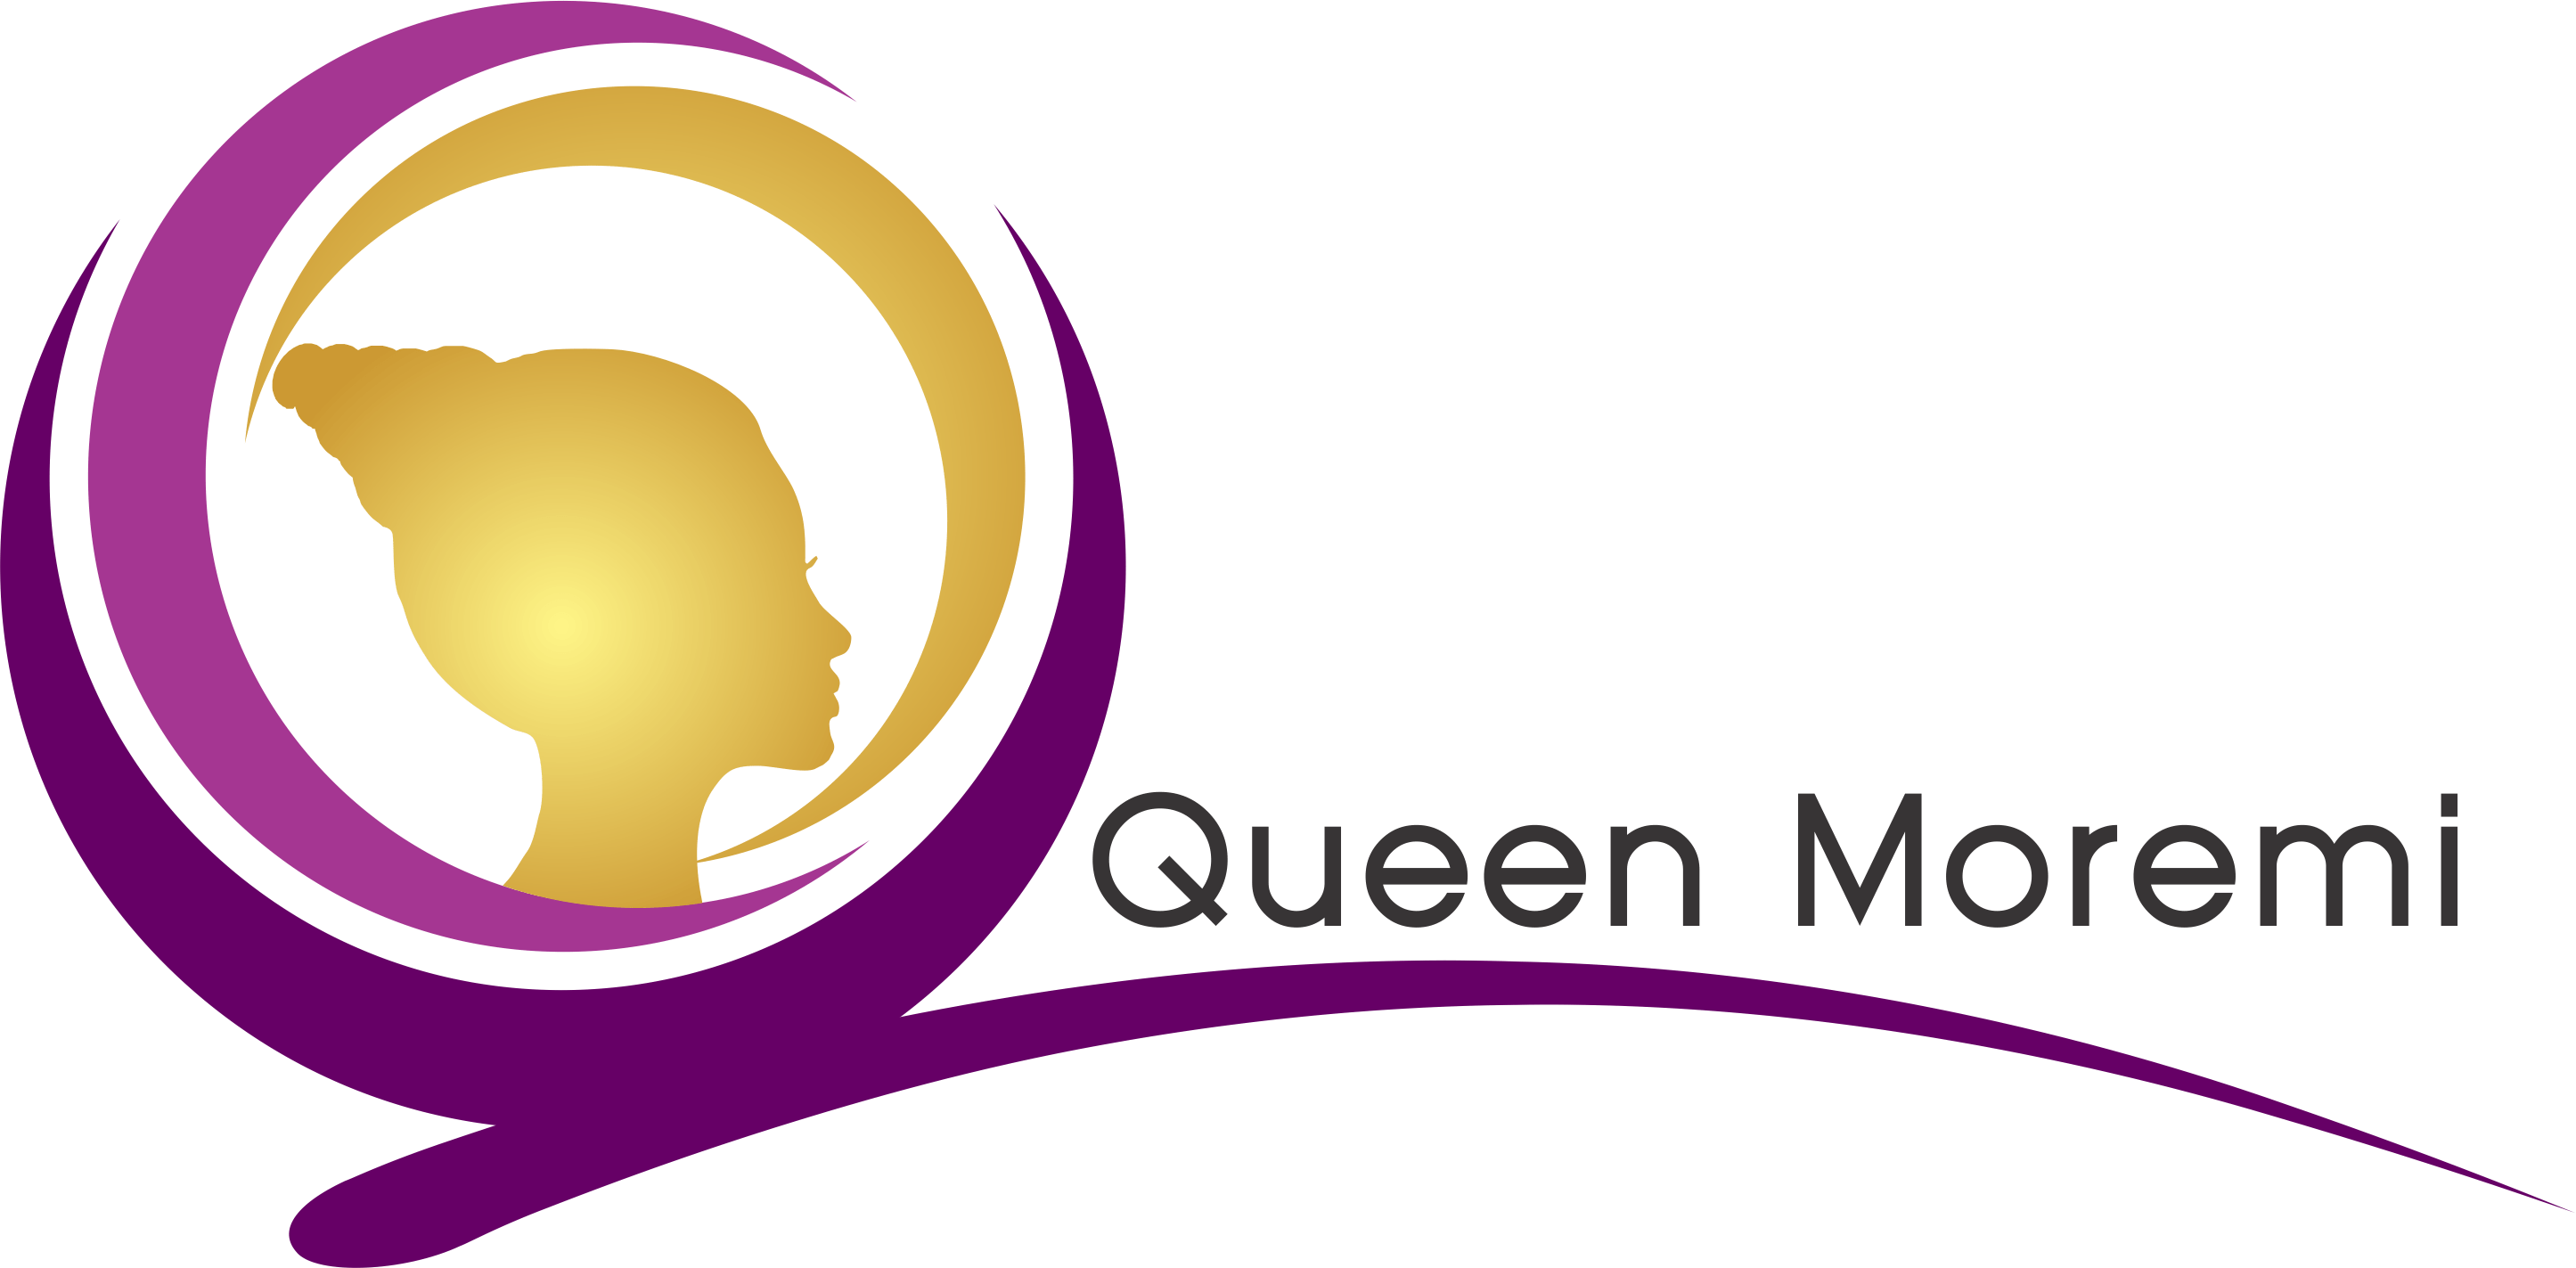 Queen Moremi Ajasoro Beauty Pageant Will Promote Activism, - Graphic Design (2891x1423)